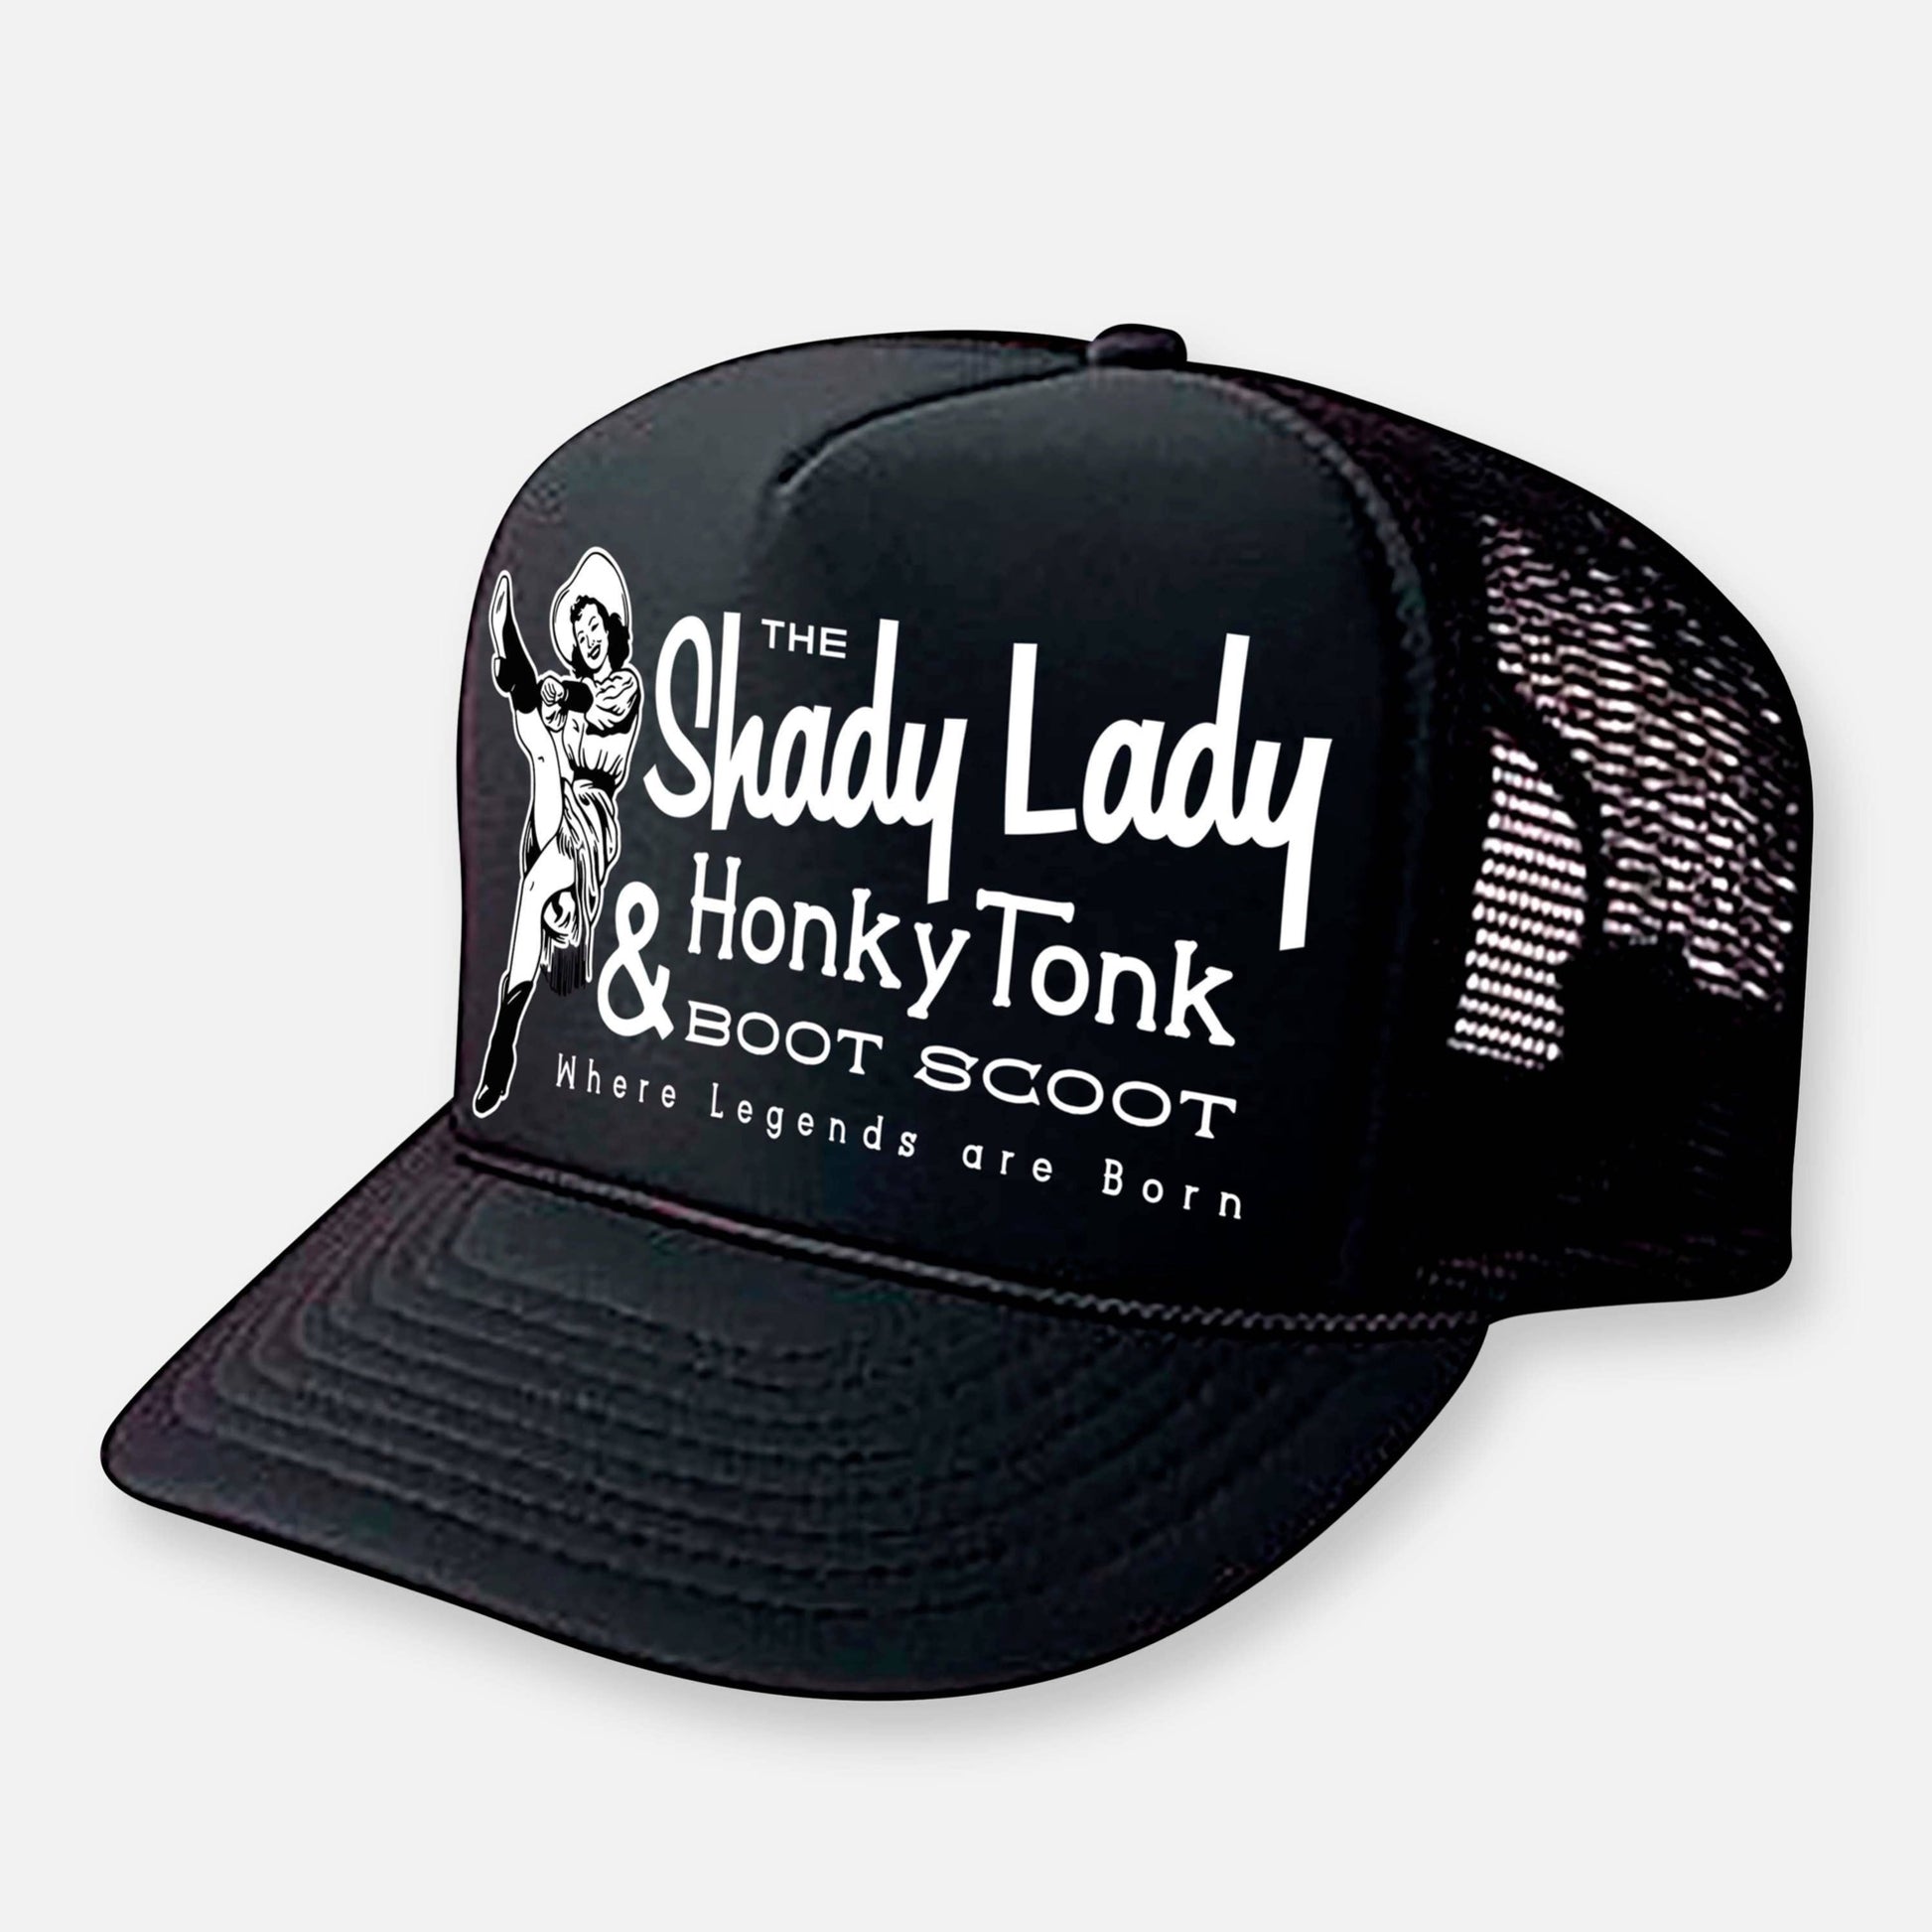 Shady Lady Honky Tonk and boot scoot trucker hat. Black with Black mesh 